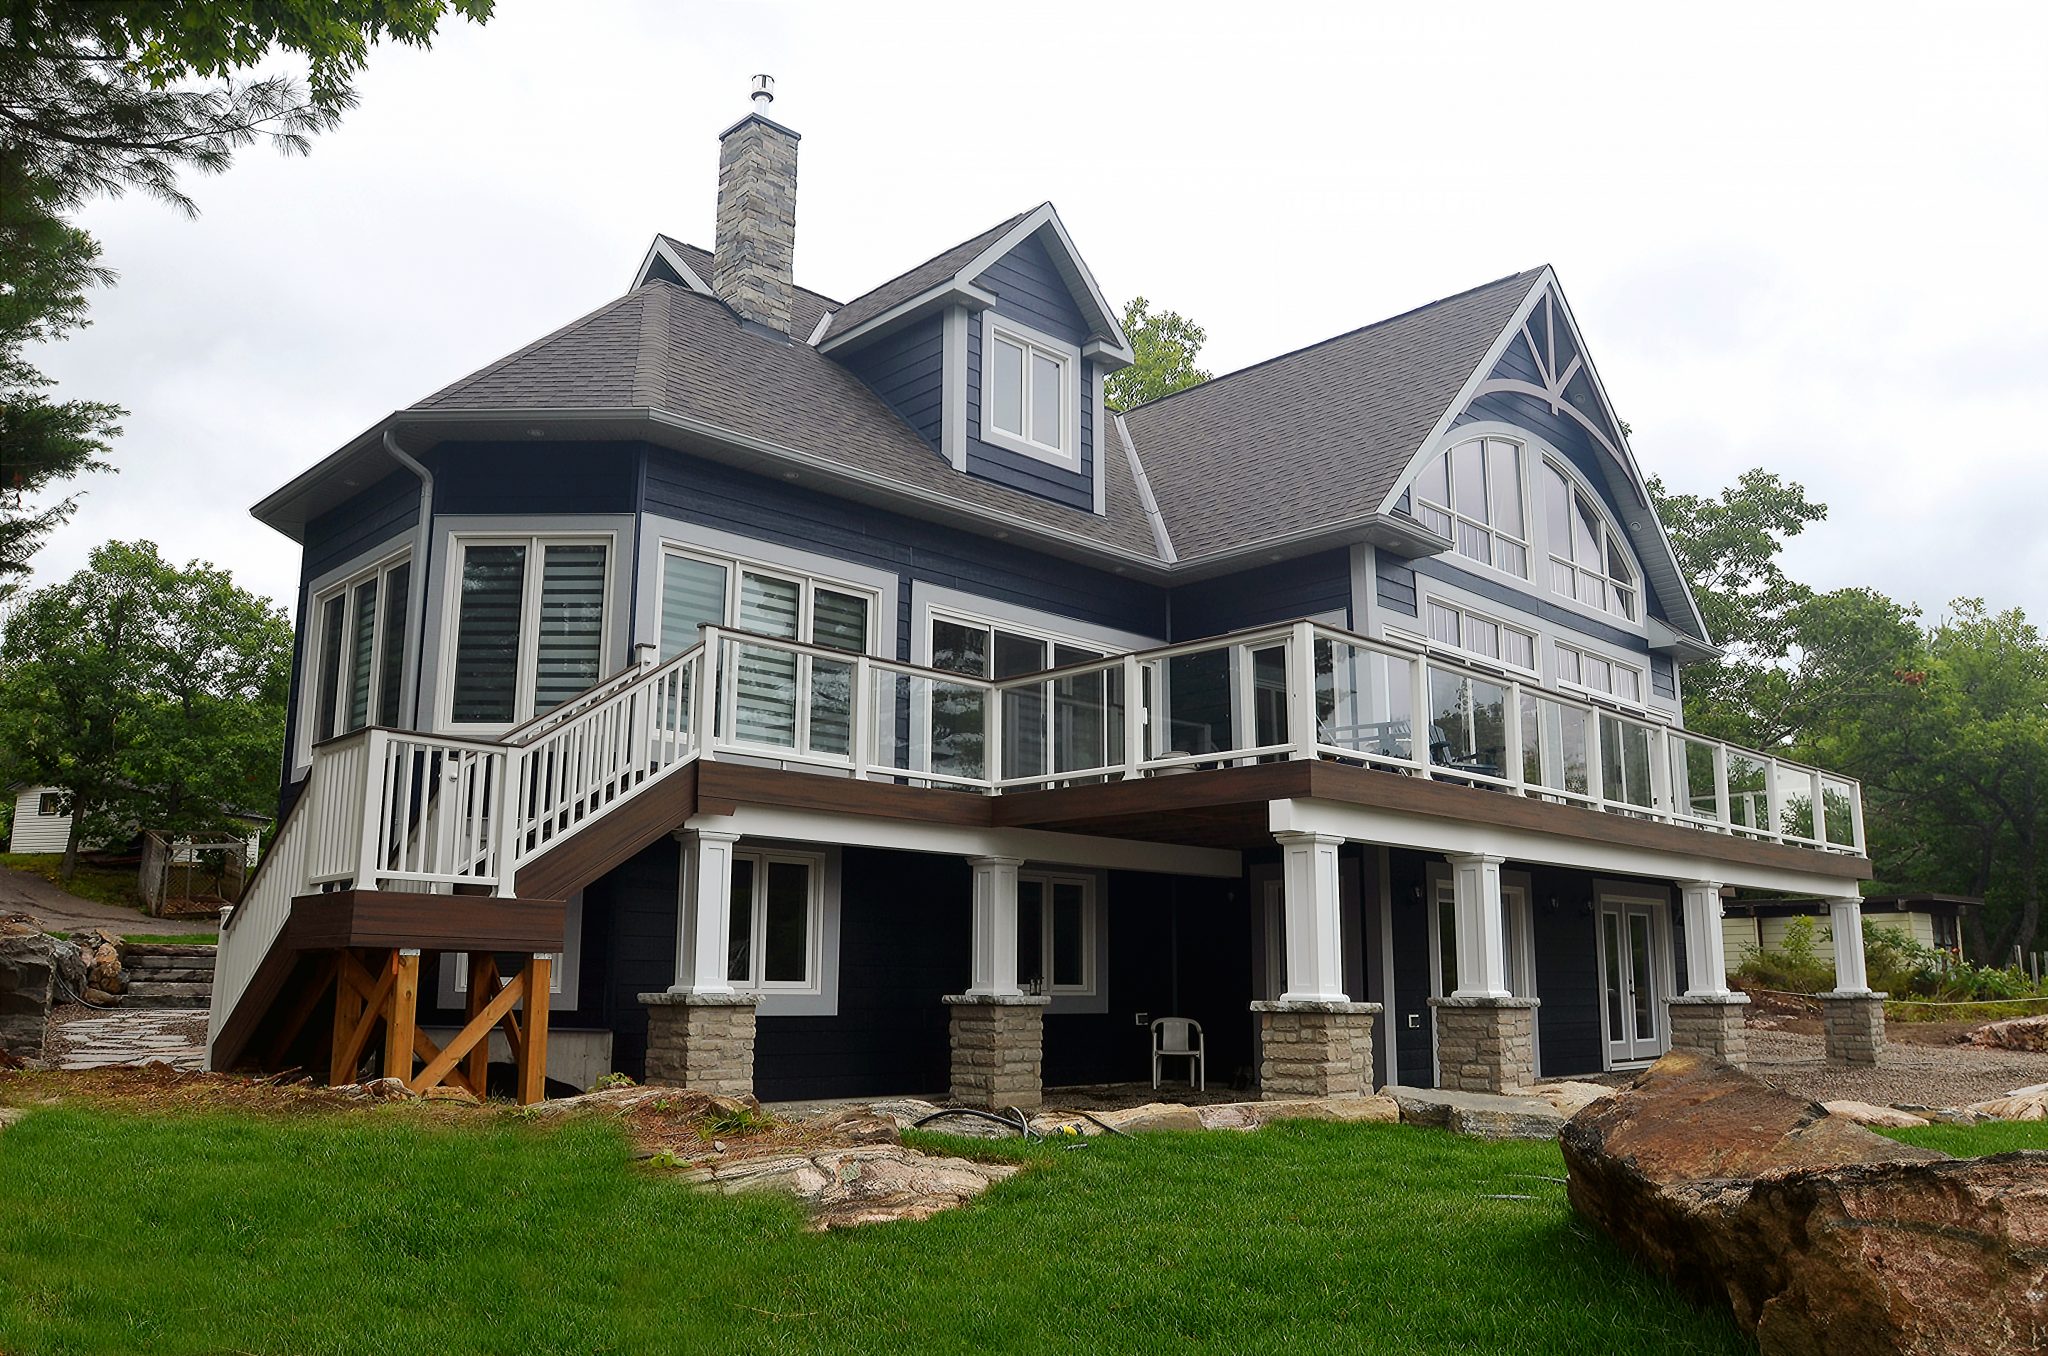 A beautiful lakeview set in the Muskoka area